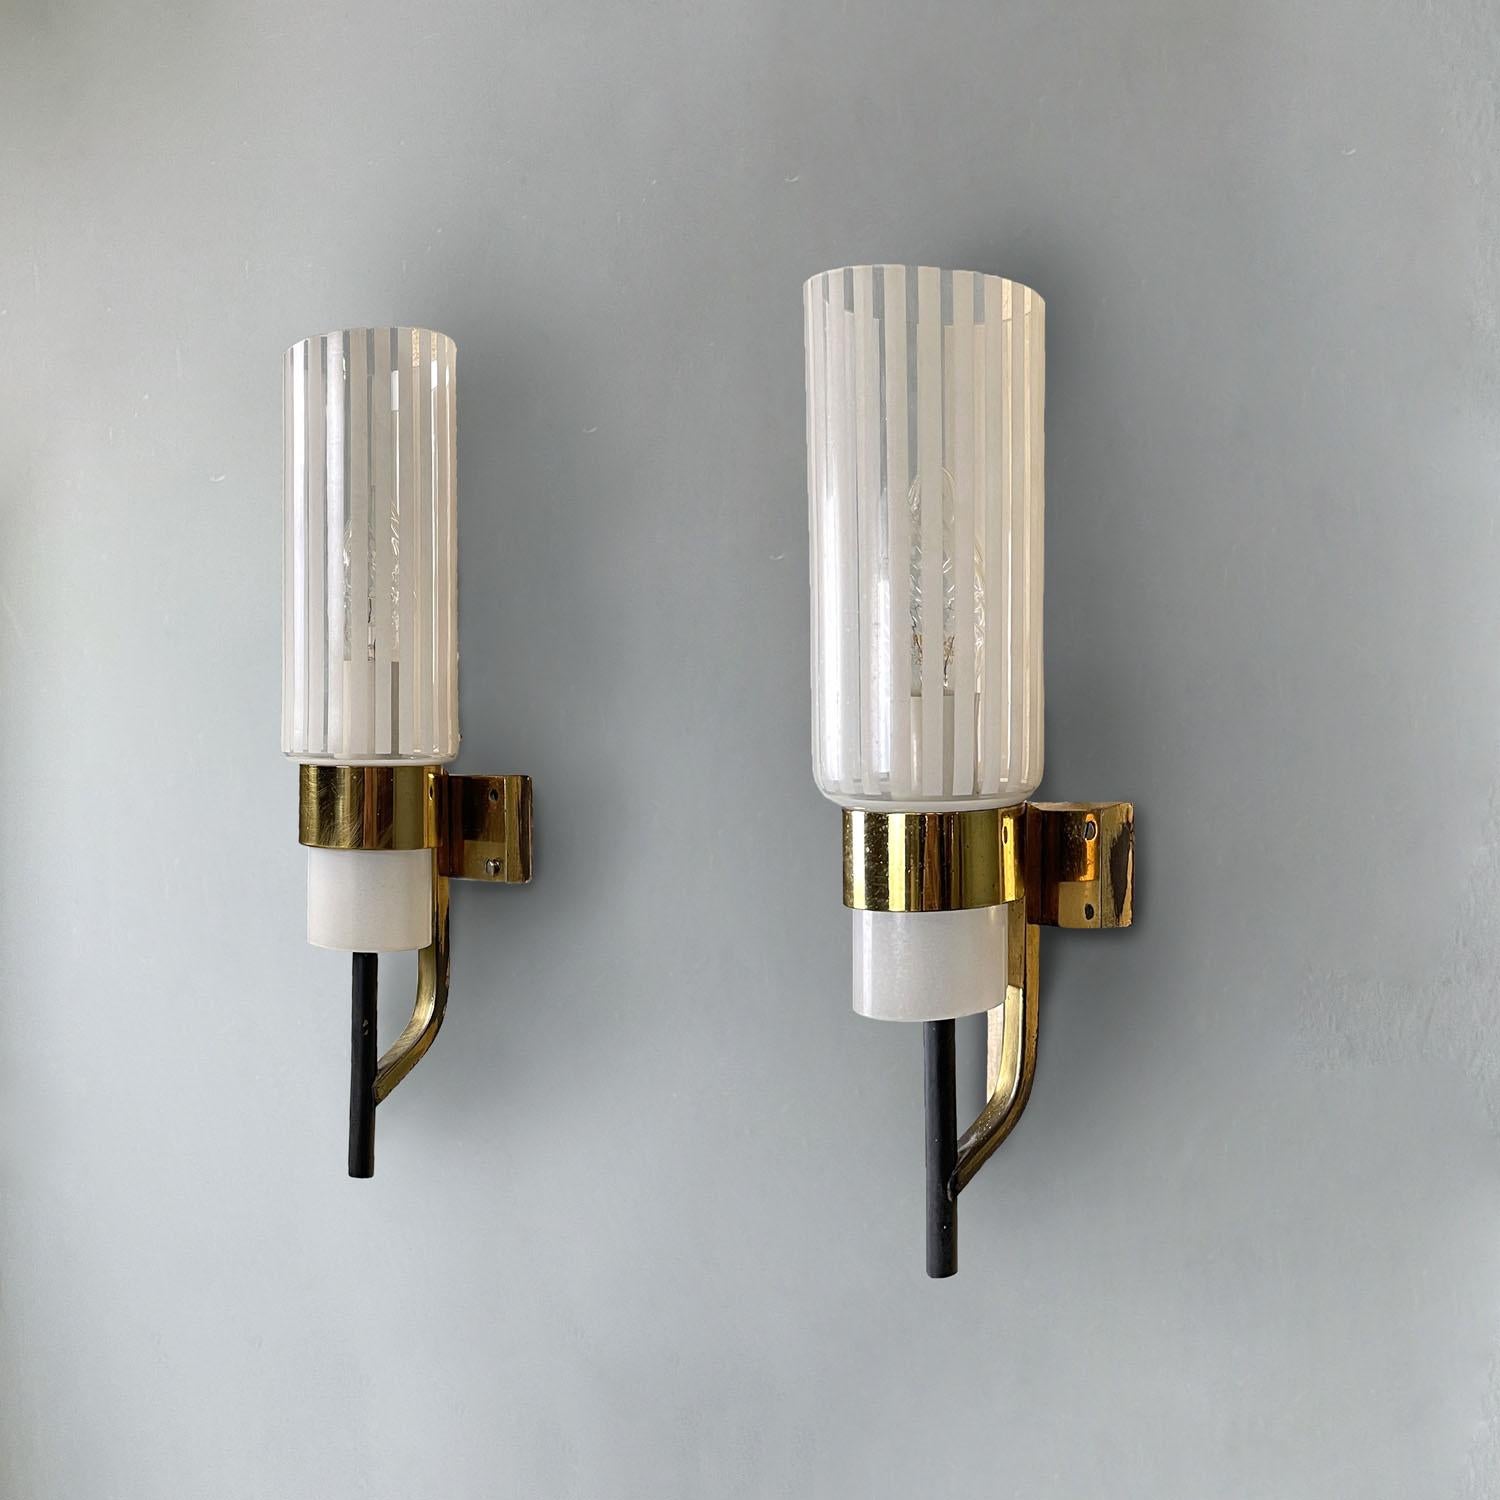 Italian mid-century modern glass and golden metal cylindrical appliques, 1960s
Pair of round base appliques. The lampshade is made of cylindrical glass with a geometric decoration given by the alternation of transparent and opaque glass. The support